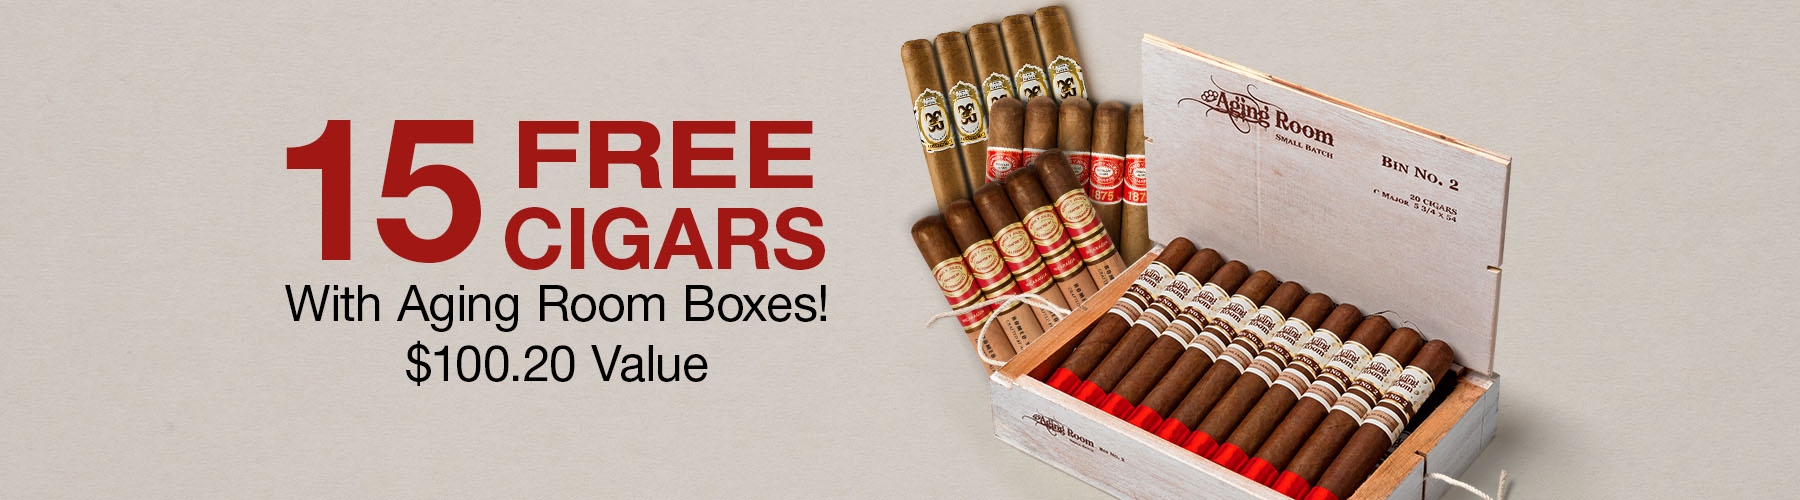 15 Cigars Free with Aging Room boxes!
$100.20 Value